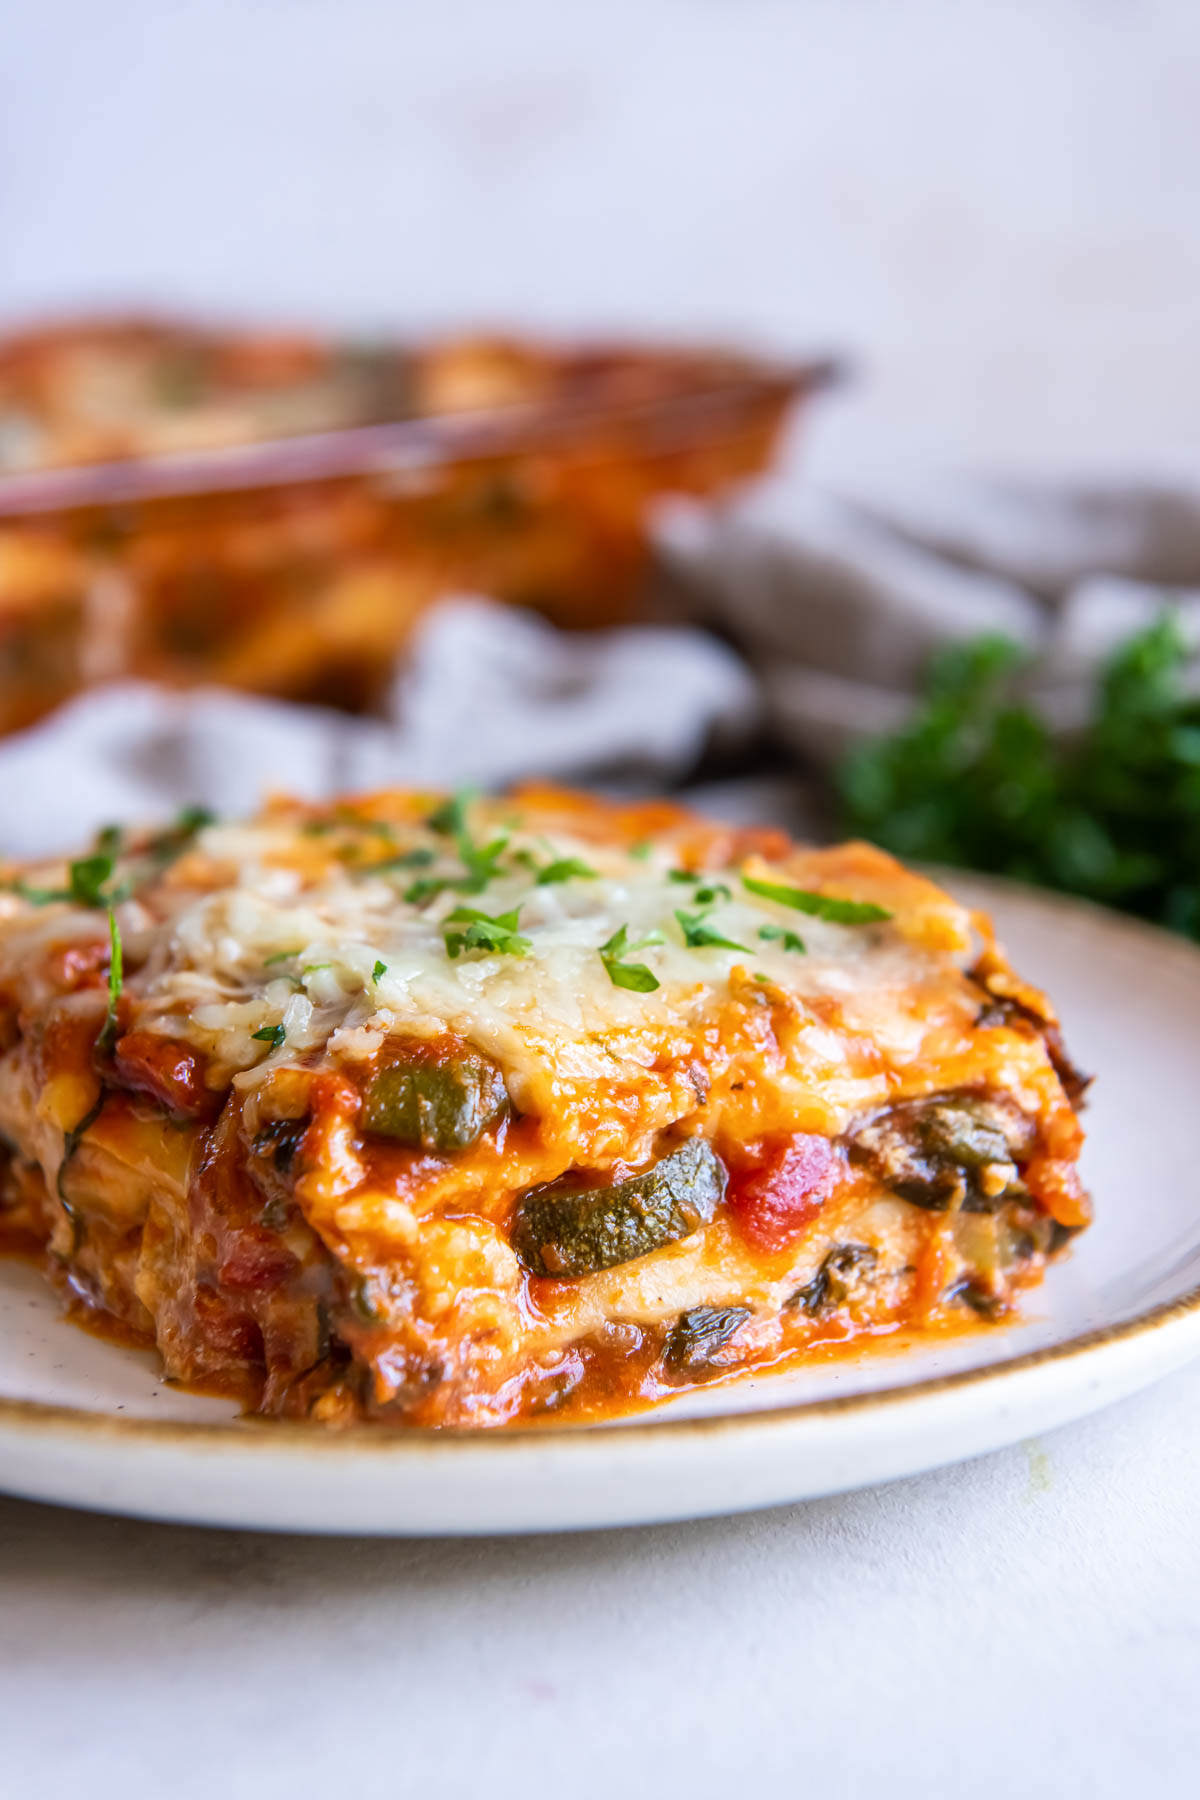 Slice of vegetable lasagna on a small plate.